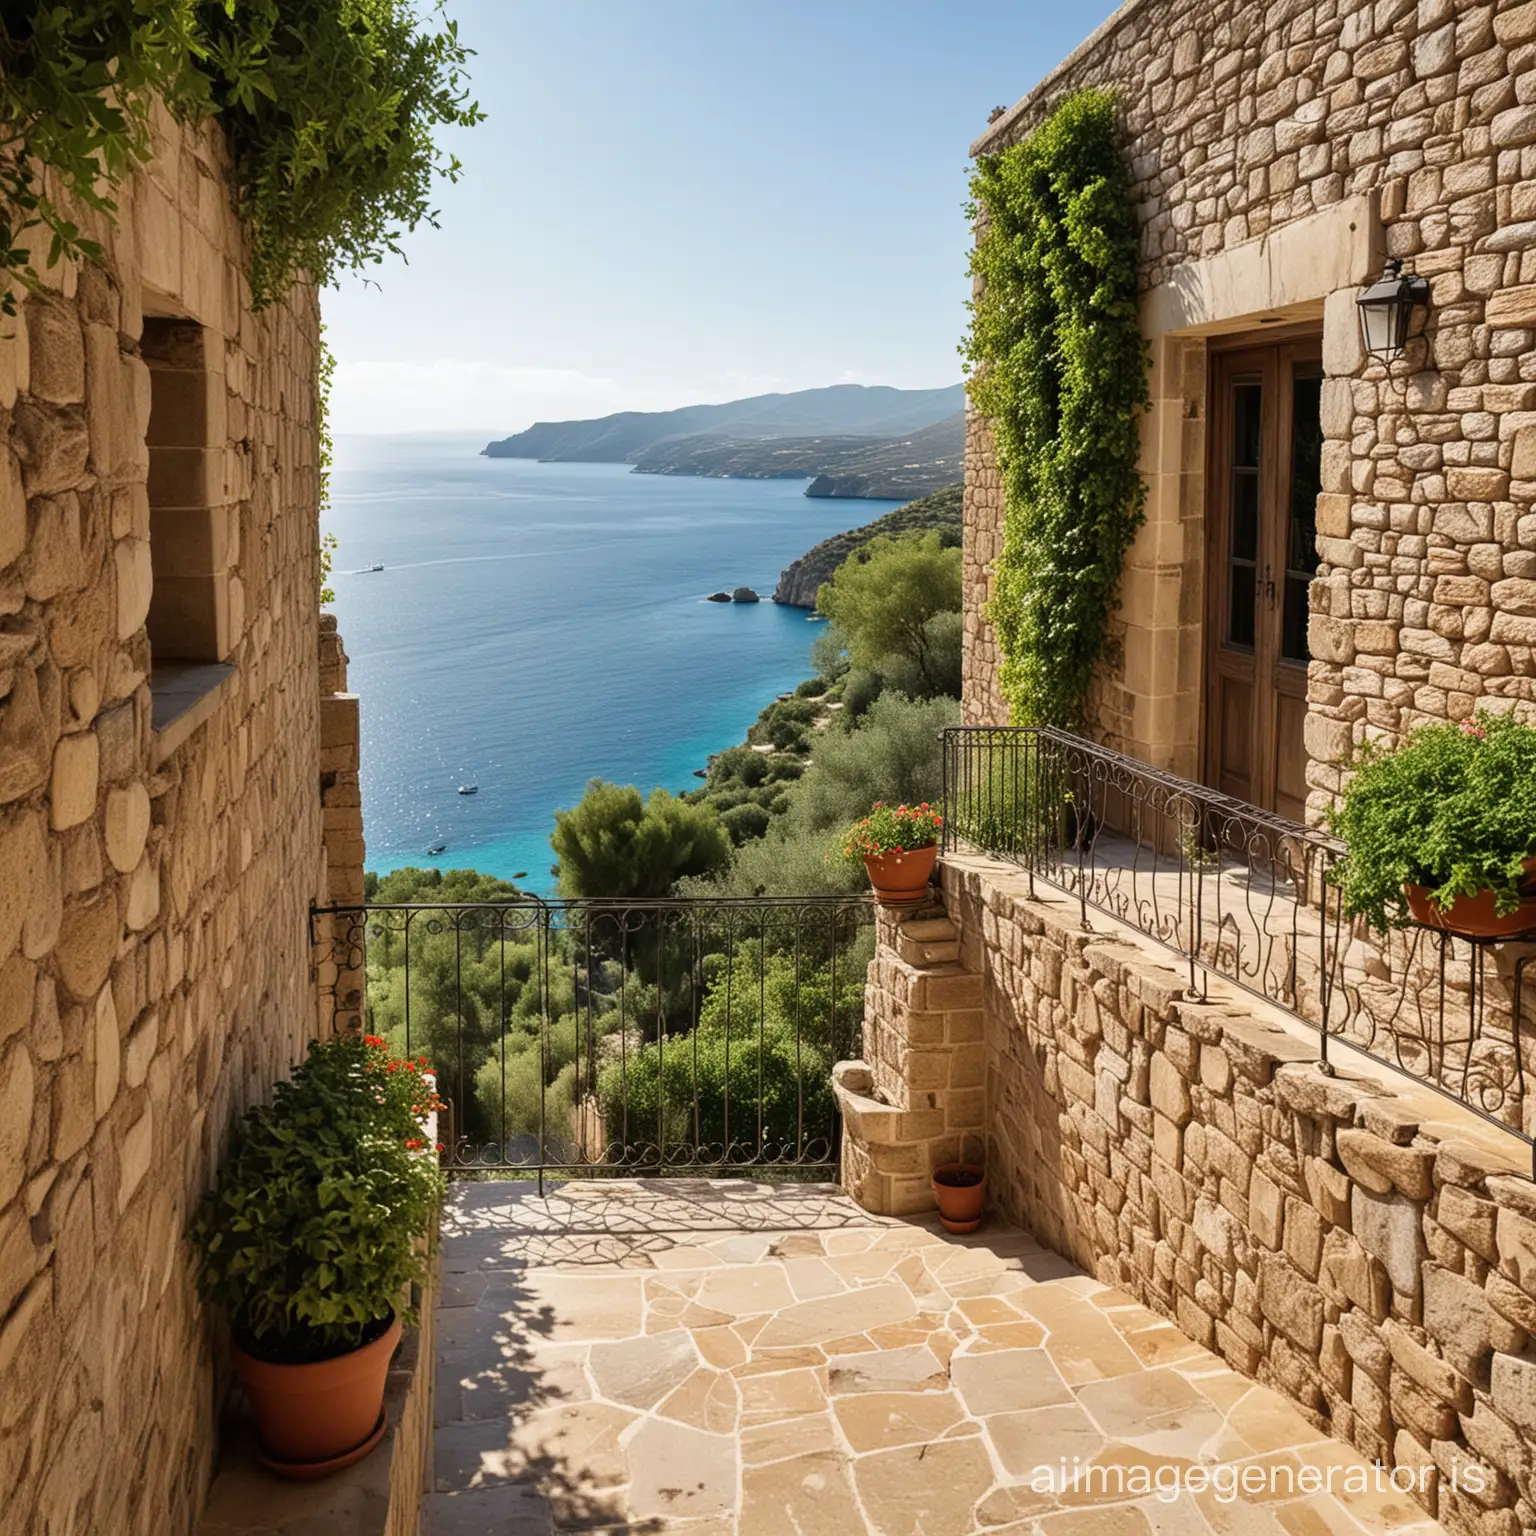 the view from  balcony in a stone tower villa in the Mani Peninsula of Greece. a couple are on the balcony facing away from the camera admiring the view. Vegetation needs to be realistic for Mani. Sunlight needs to be realistic for Greece in the summer